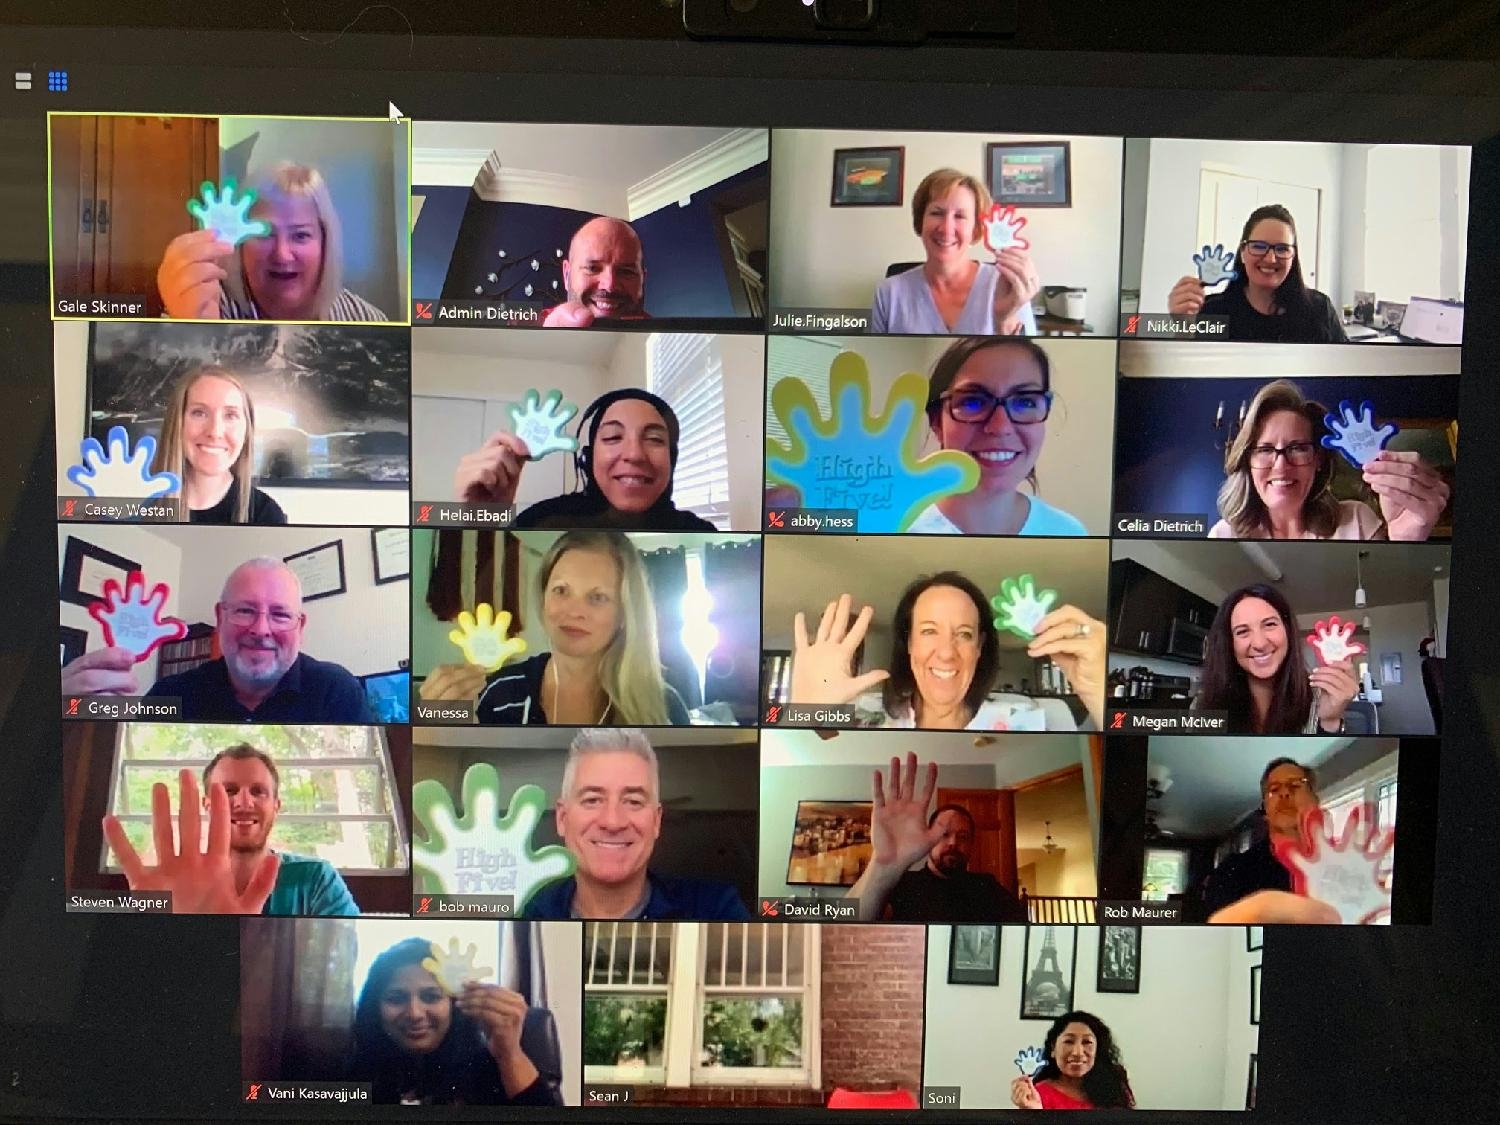 GPTW recertification party 2020. First virtual celebration event - it was fun to play and laugh together again. 